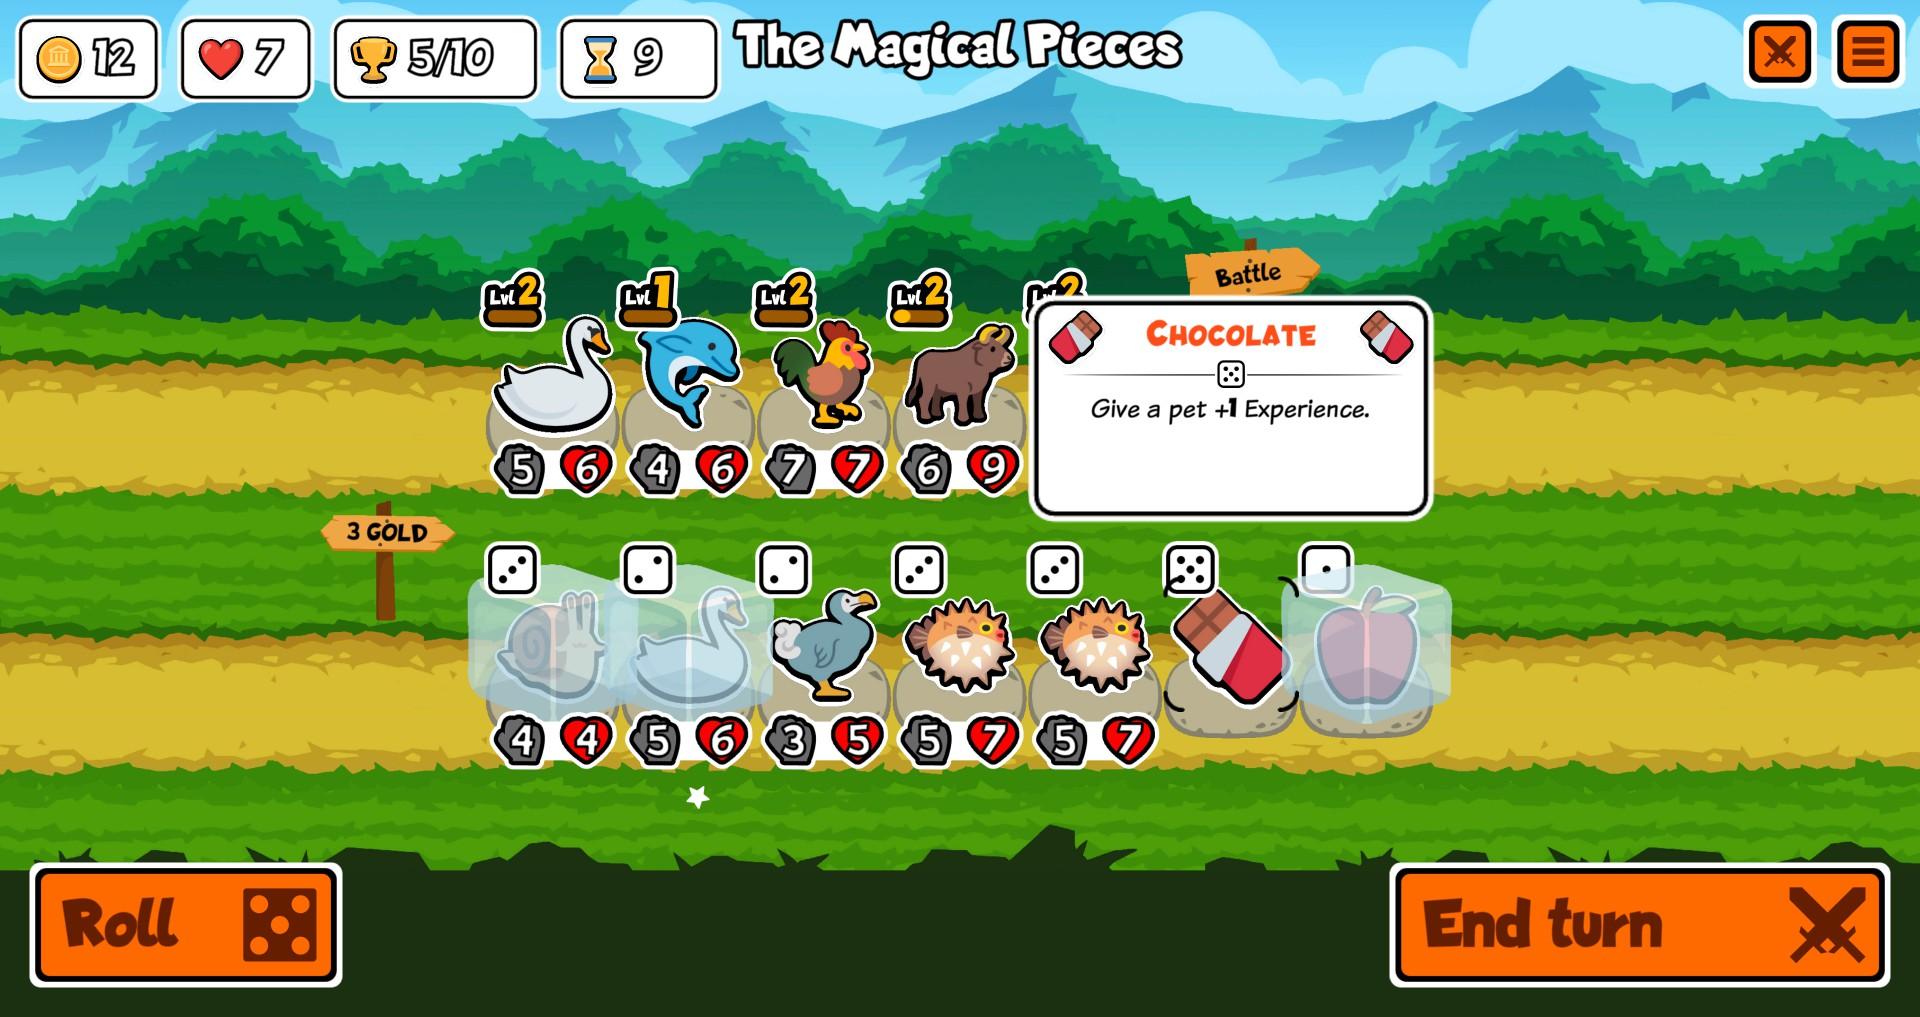 Super Auto Pets - Chocolate Experience Tip